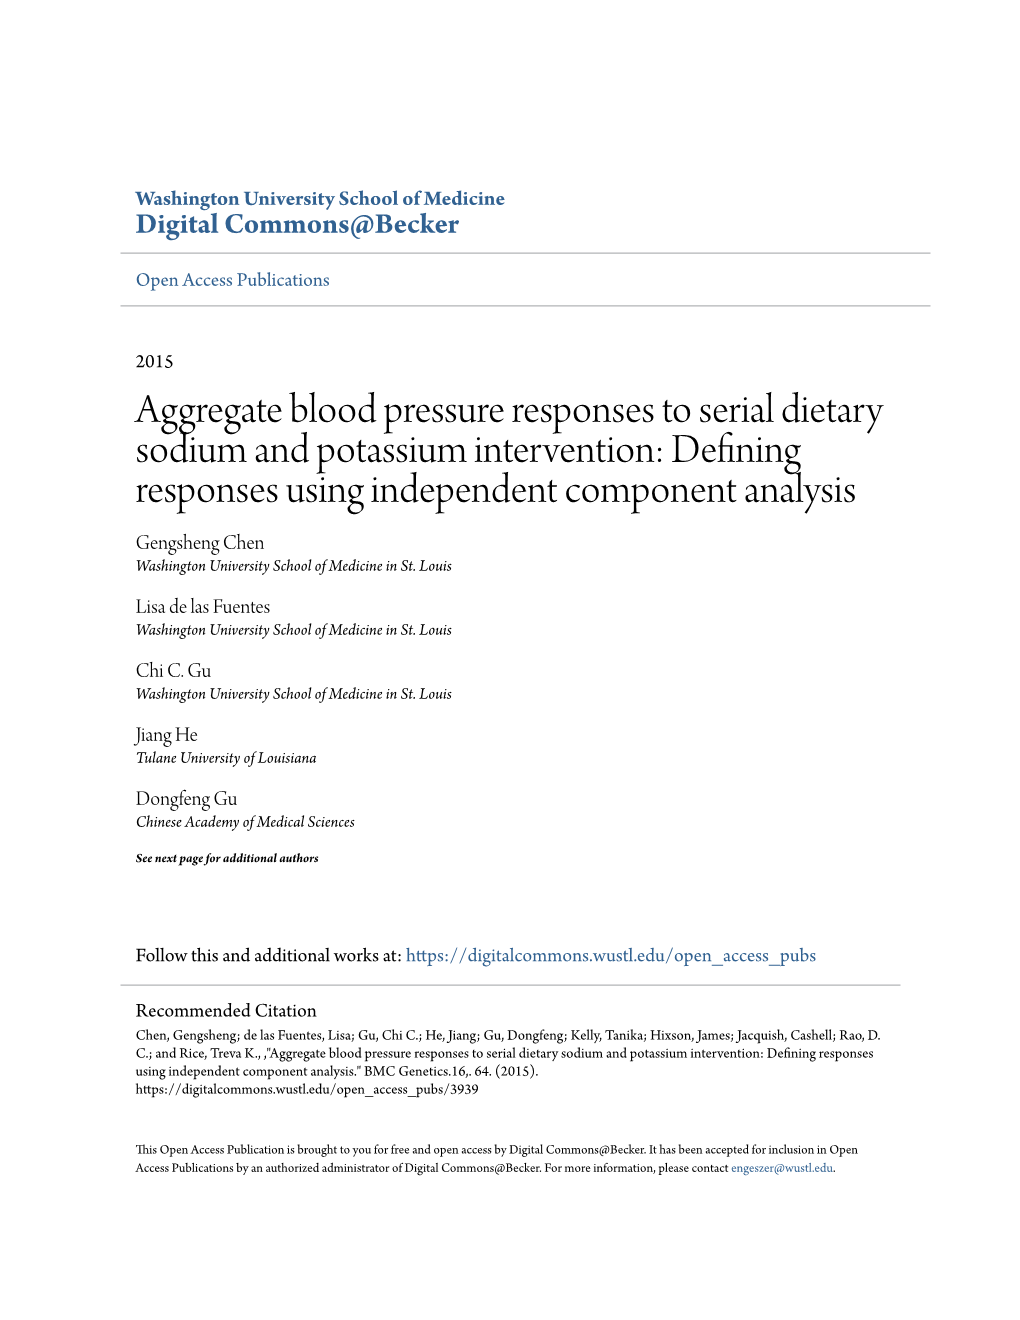 Aggregate Blood Pressure Responses To